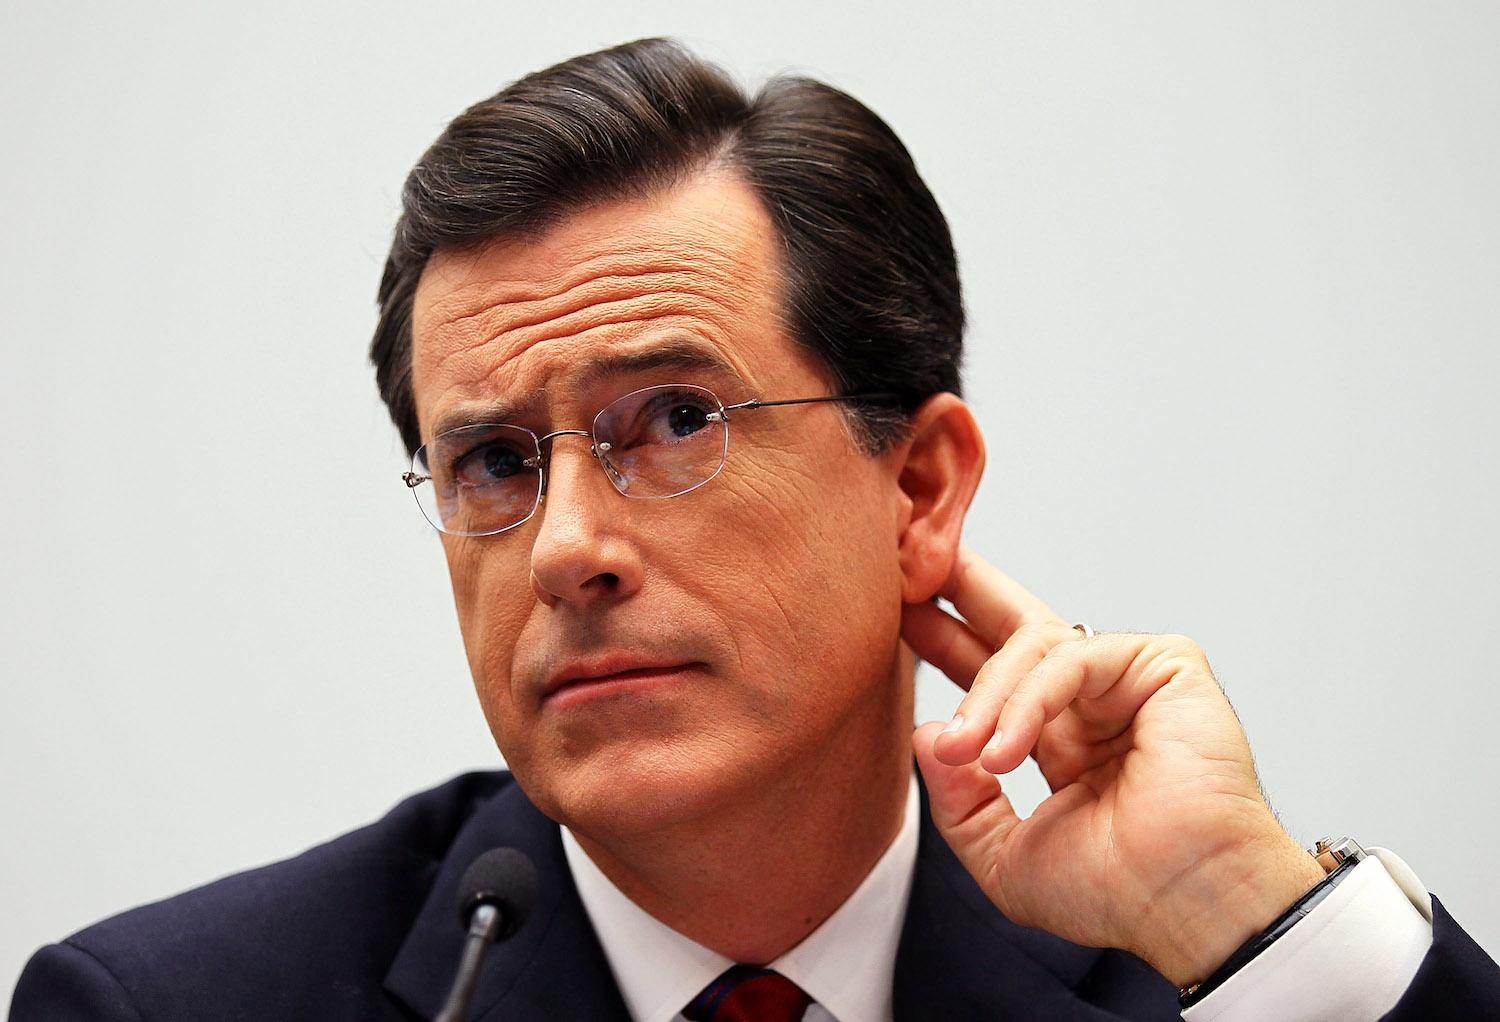 All the Times Stephen Colbert Went Too Far